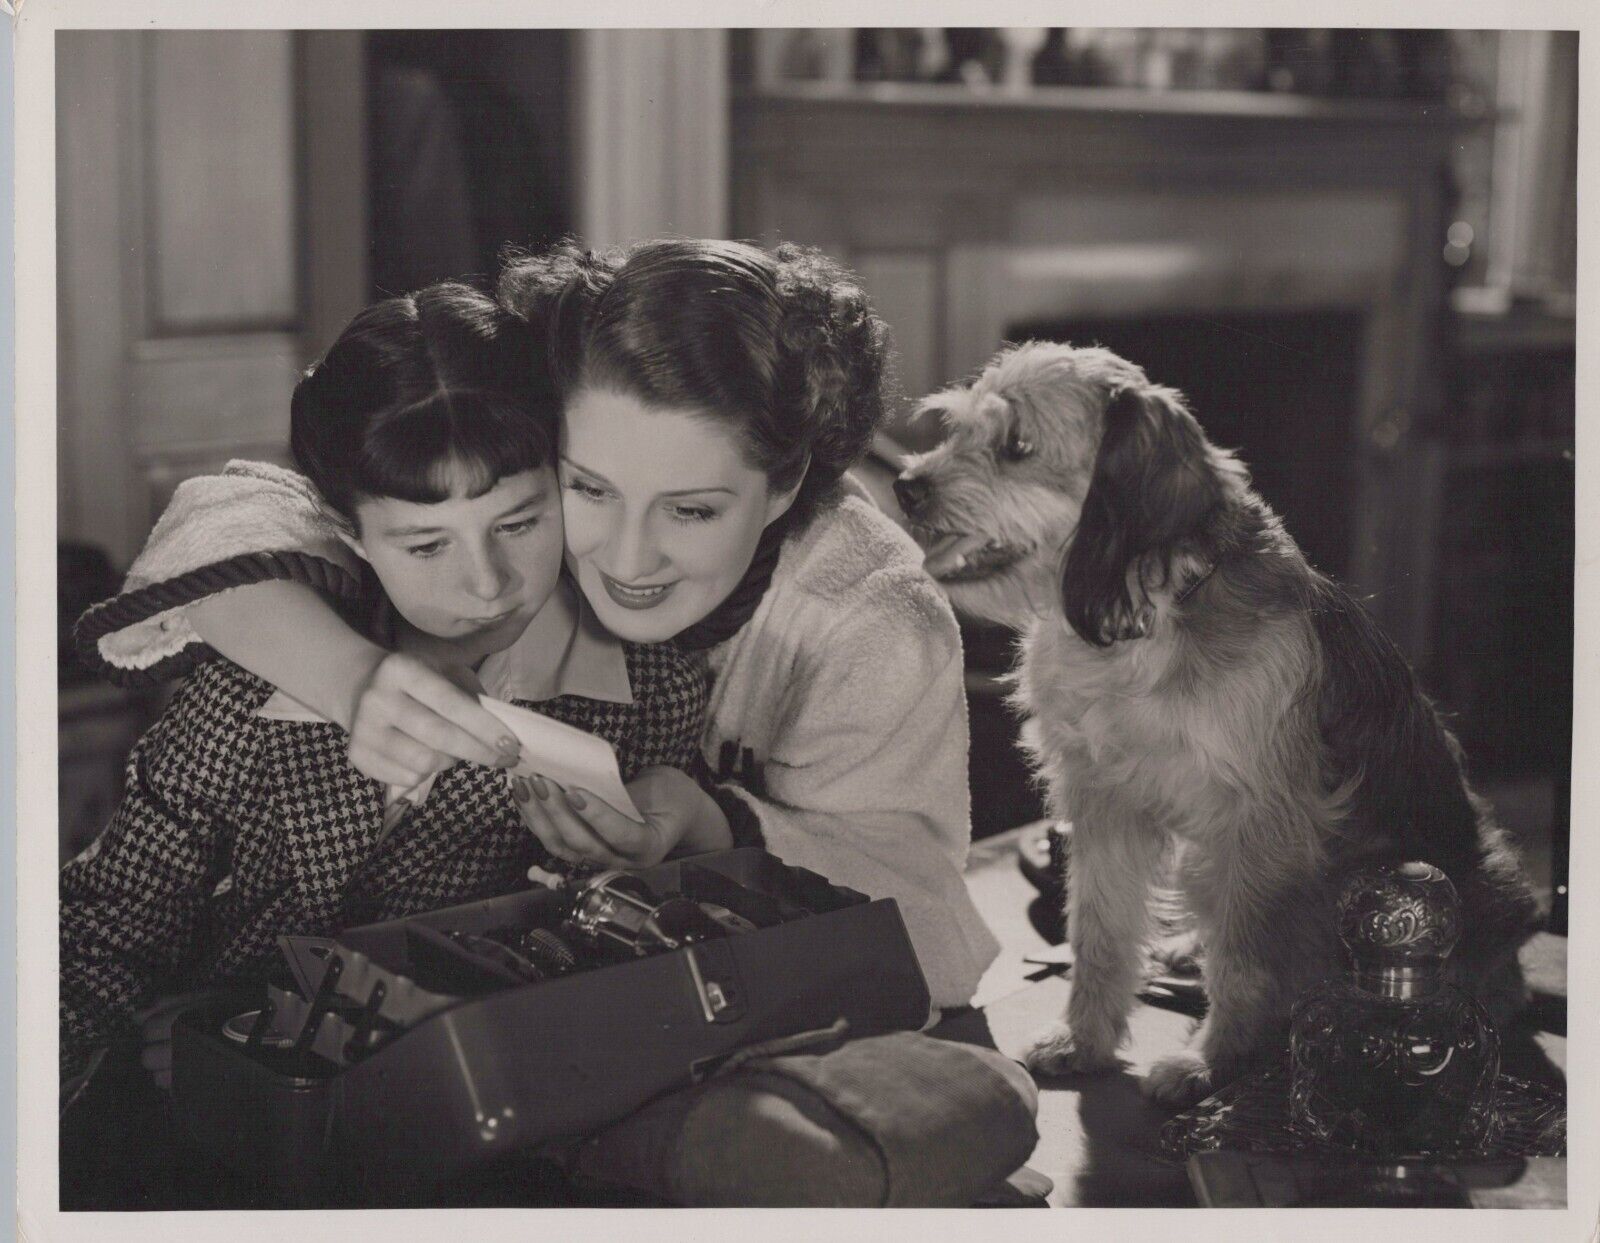 HOLLYWOOD NORMA SHEARER + VIRGINIA WEIDLER THE WOMEN 1939 MGM DBW Photo C33